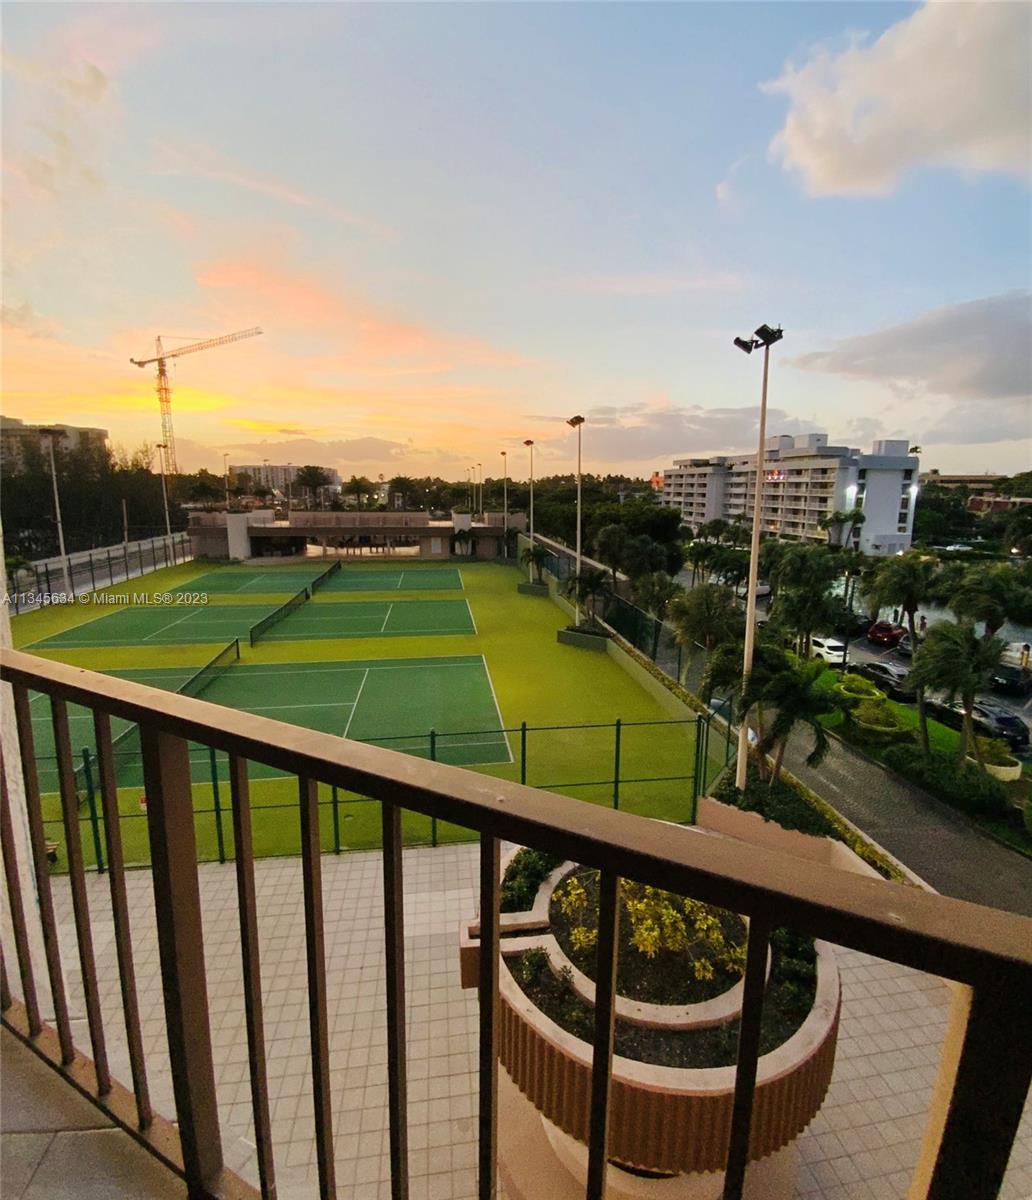 Tennis court & city view from second balcony